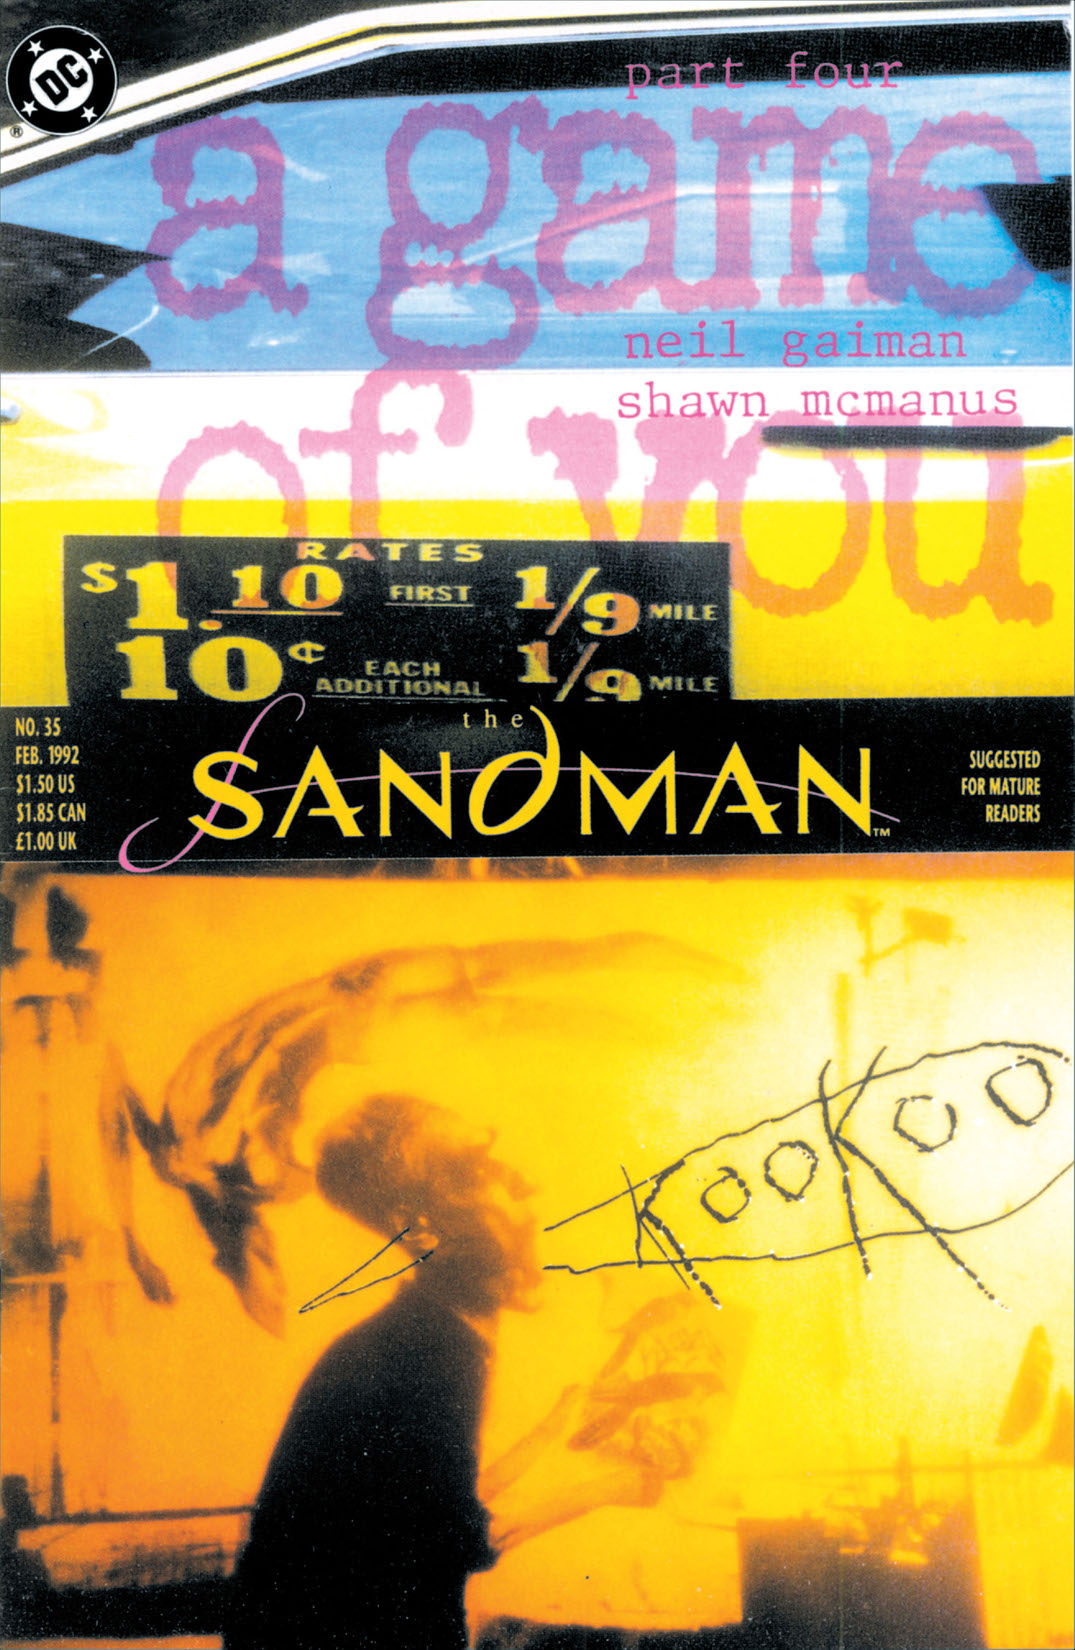 The Sandman #35 preview images